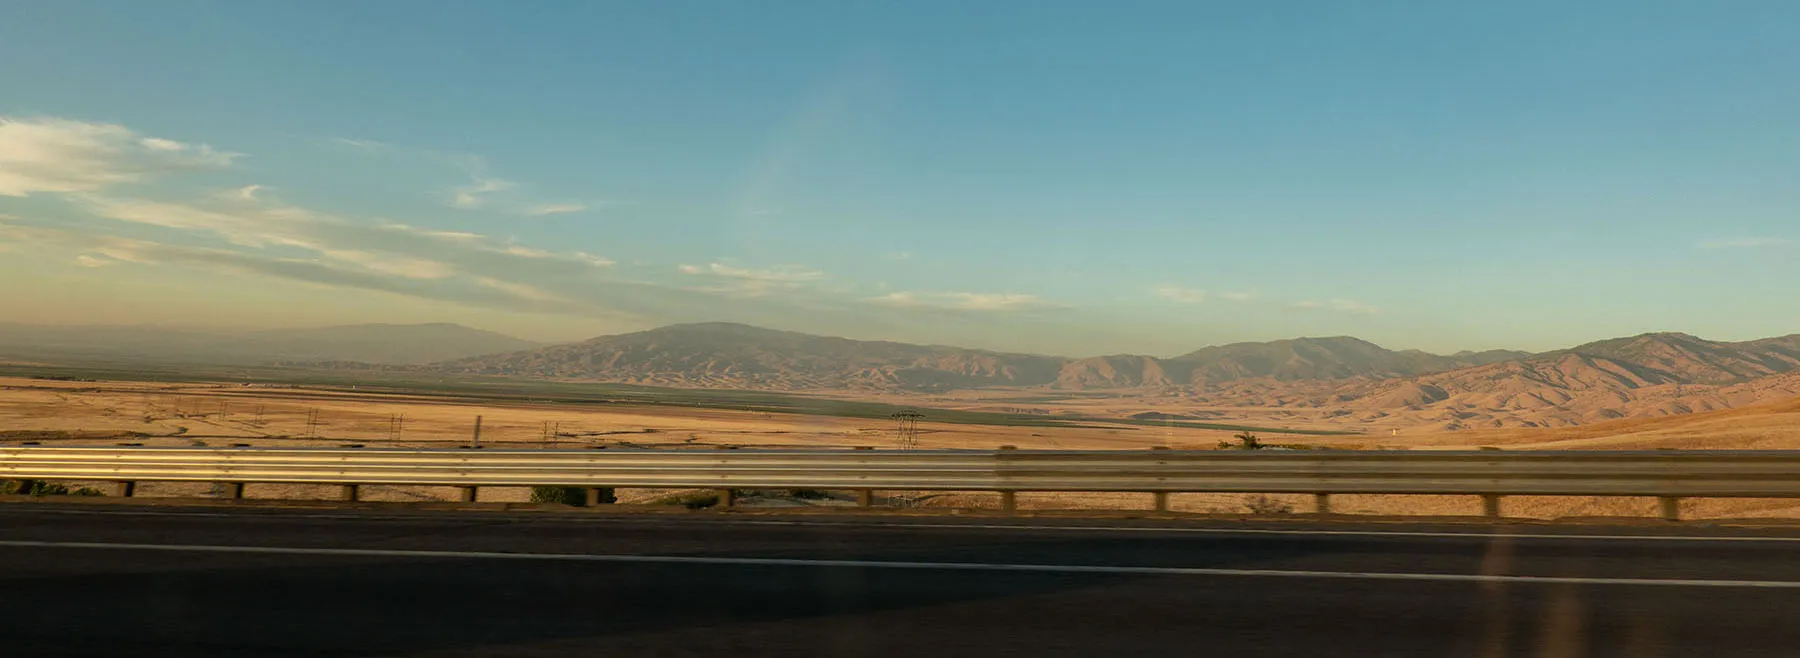 The southern end of the San Joaquin Valley from the I5